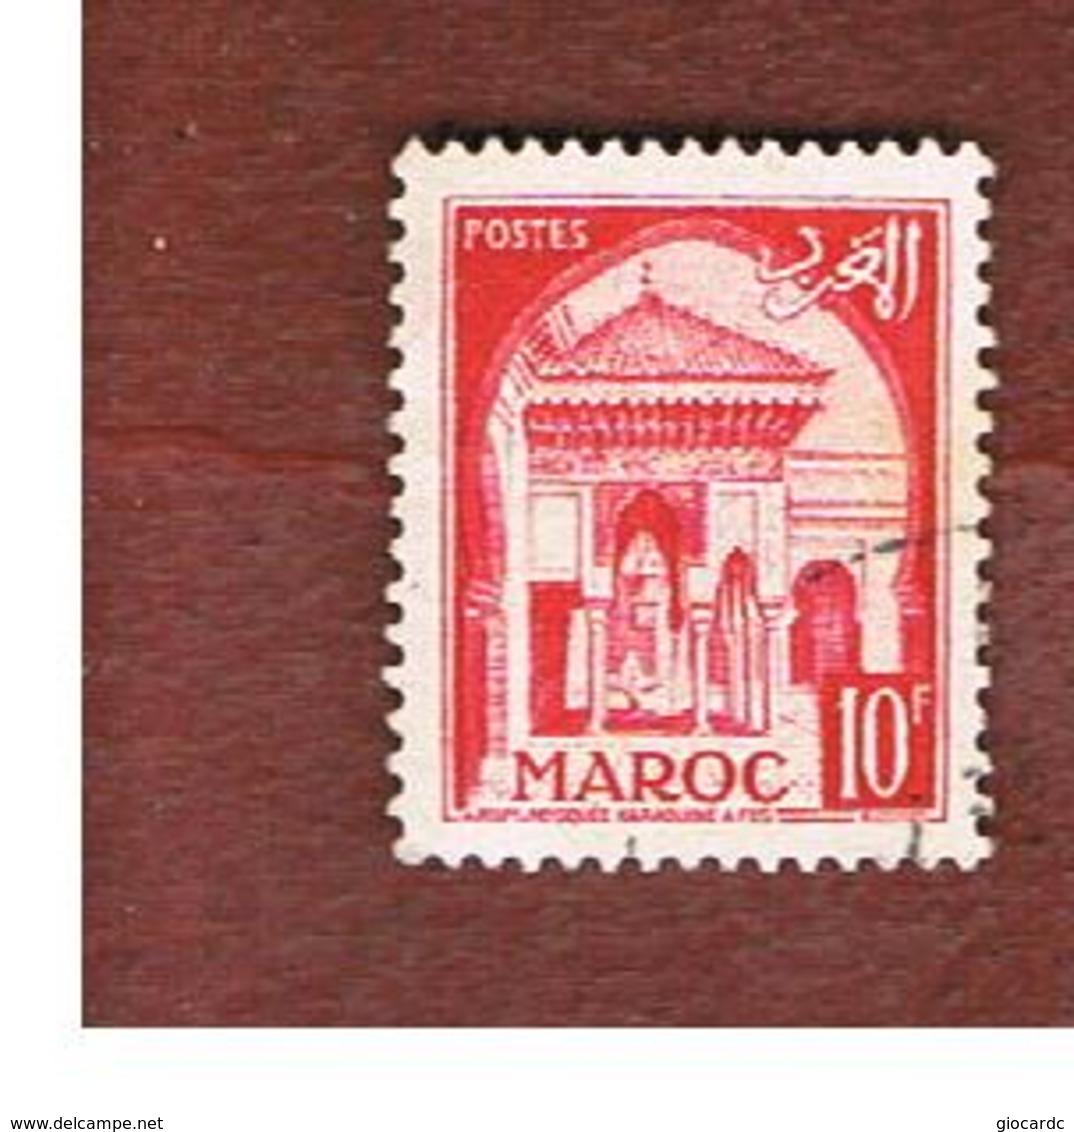 MAROCCO FRANCESE (FRENCH MOROCCO)  - SG 401  -  1953  SITES:KARAOUINE MOSQUE - USED ° - Usati